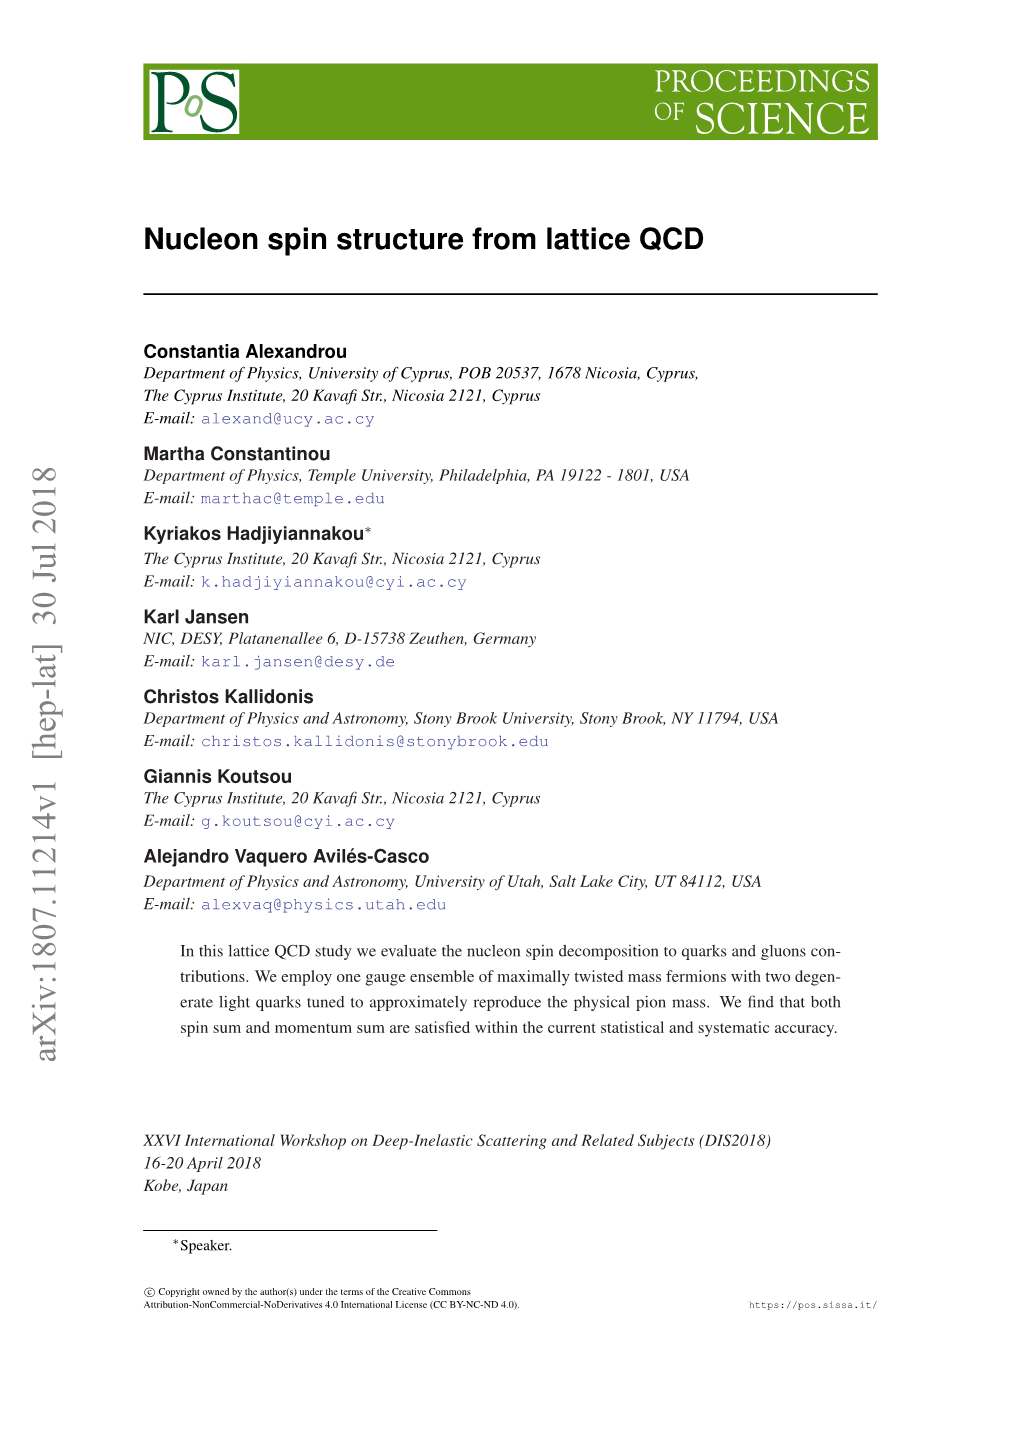 Nucleon Spin Structure from Lattice QCD